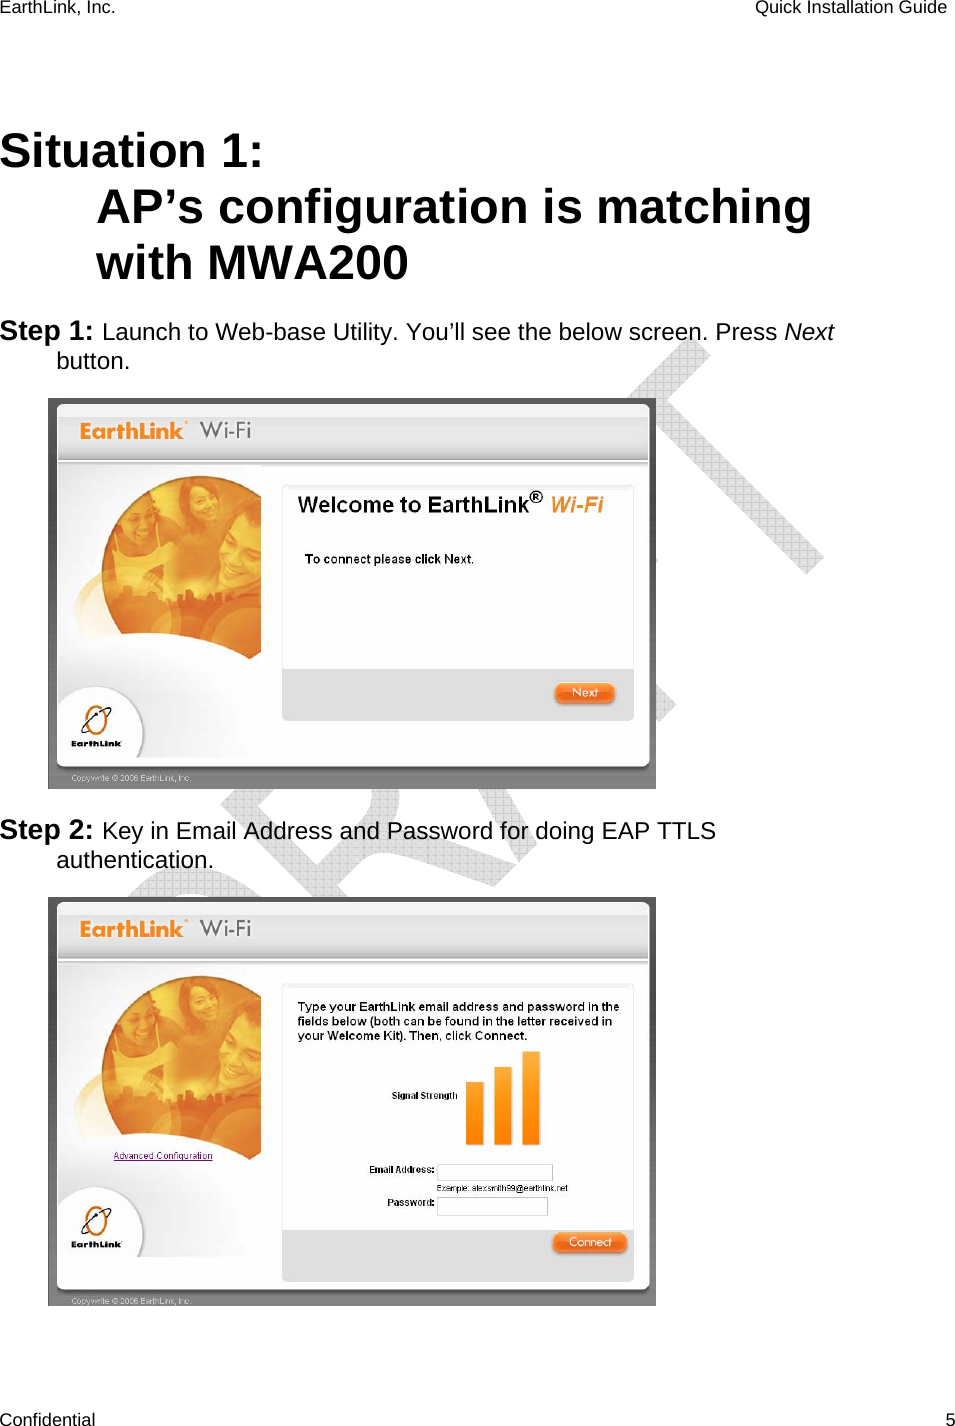 EarthLink, Inc.    Quick Installation Guide    Confidential   5  Situation 1: AP’s configuration is matching with MWA200 Step 1: Launch to Web-base Utility. You’ll see the below screen. Press Next button.  Step 2: Key in Email Address and Password for doing EAP TTLS authentication.   